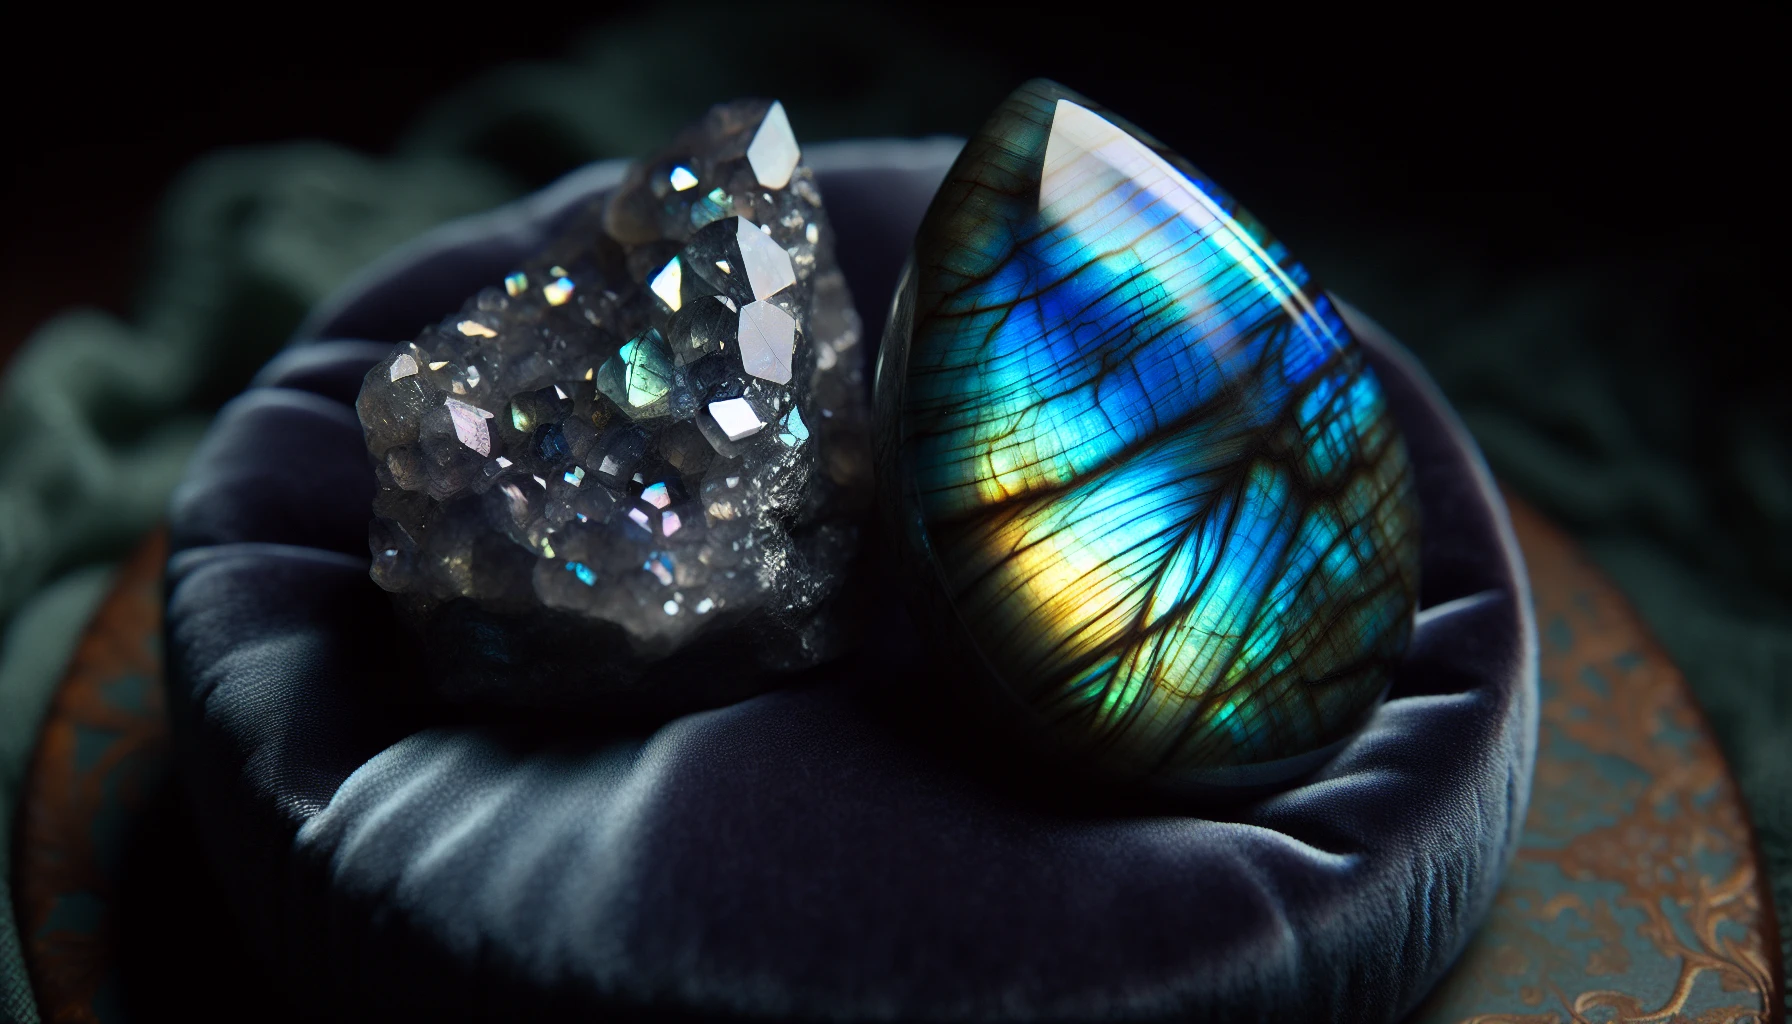 Two visually stunning gemstones, larvikite and labradorite, often confused by people